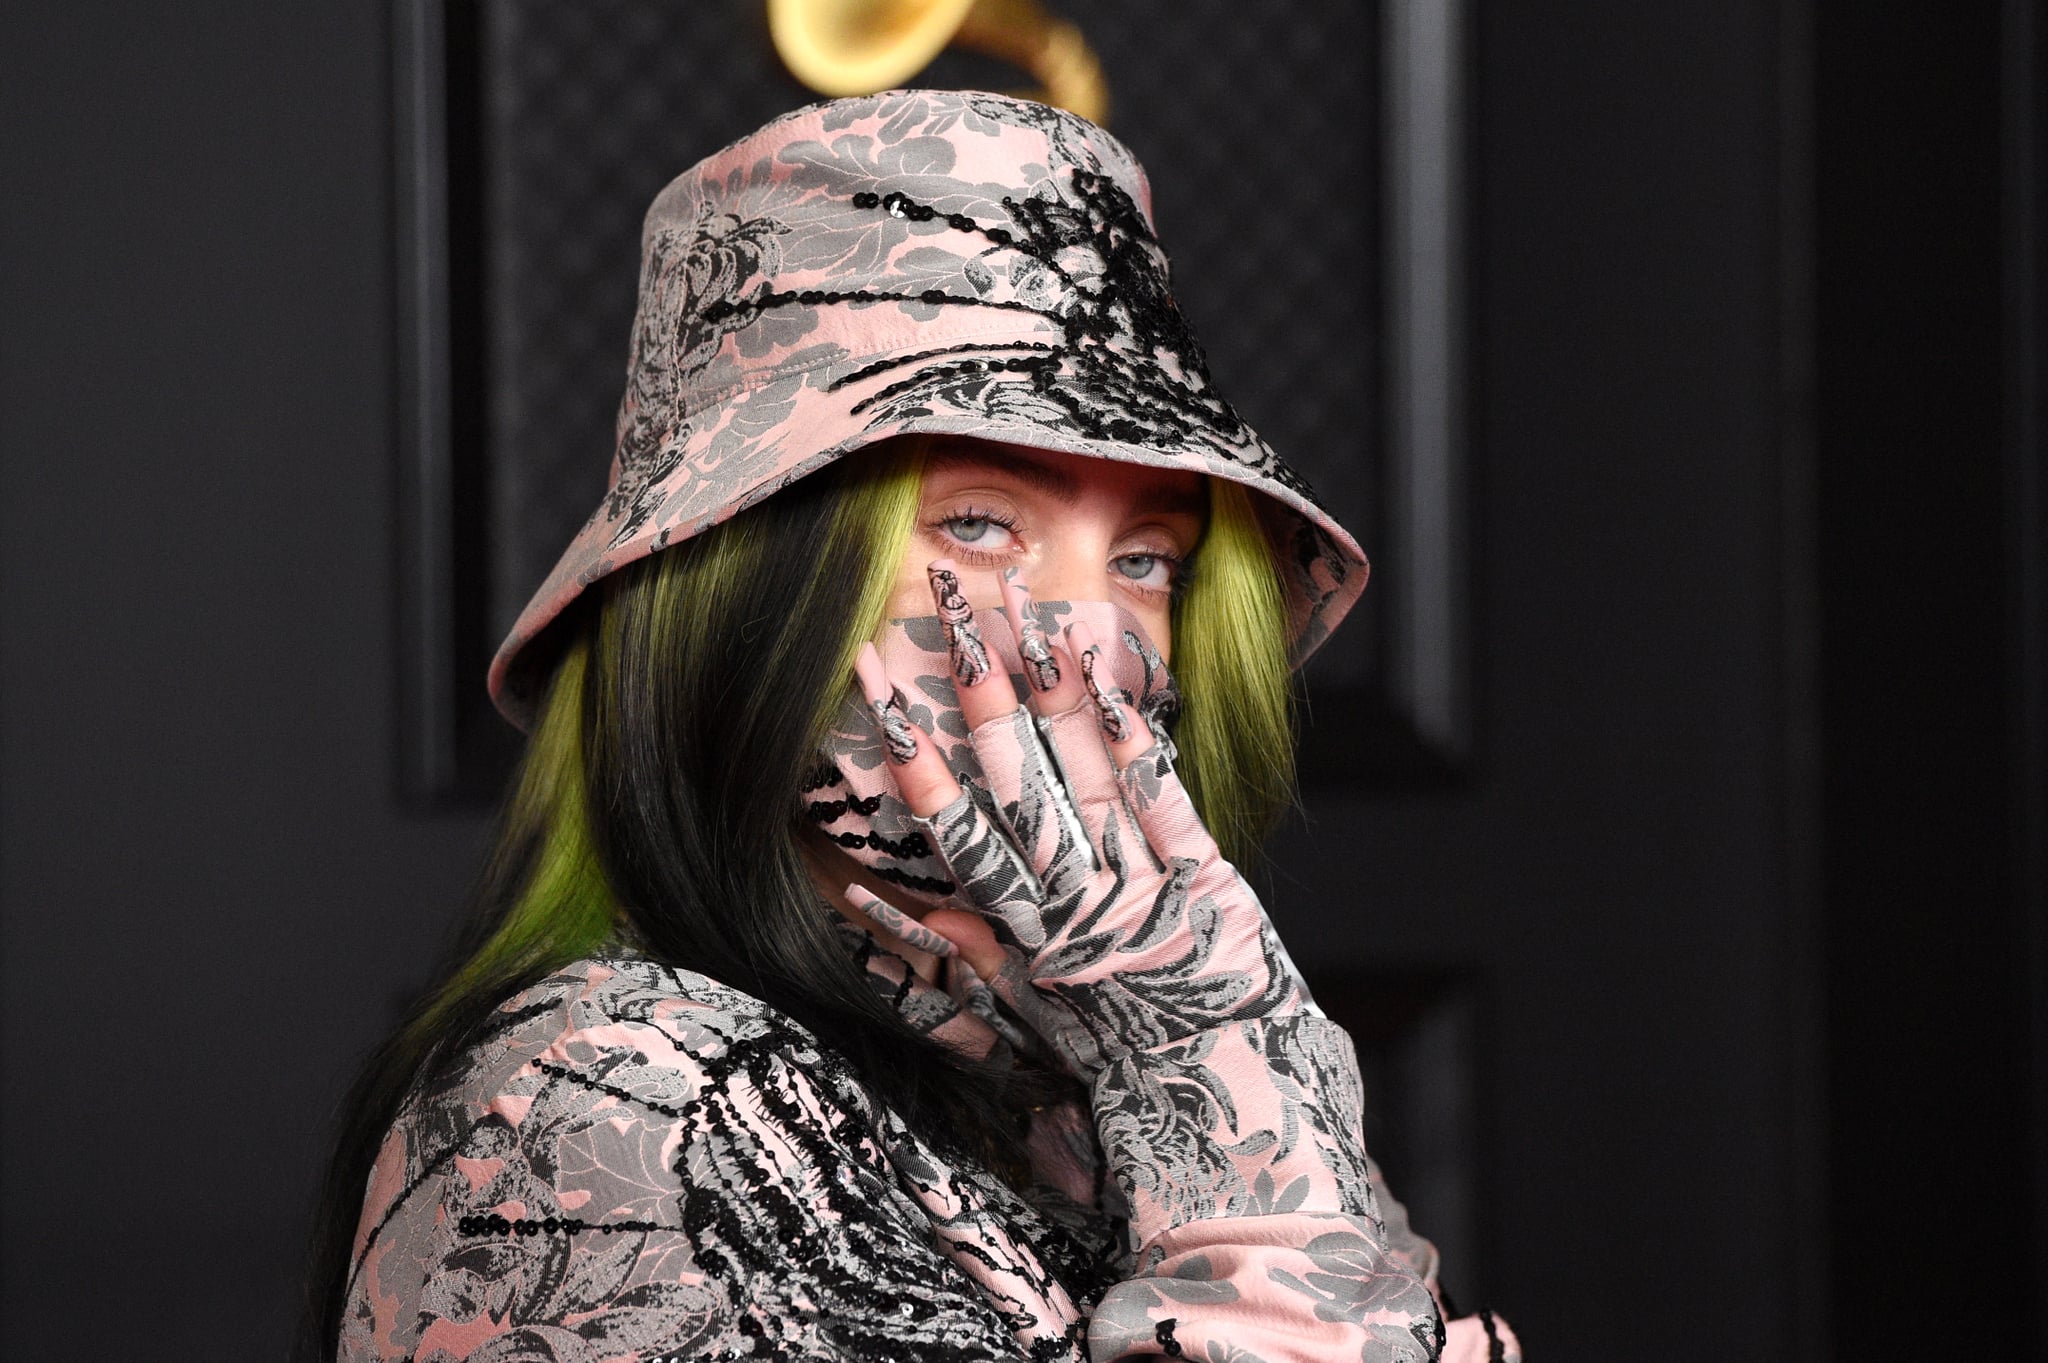 LOS ANGELES, CALIFORNIA - MARCH 14: Billie Eilish attends the 63rd Annual GRAMMY Awards at Los Angeles Convention Centre on March 14, 2021 in Los Angeles, California. (Photo by Kevin Mazur/Getty Images for The Recording Academy )